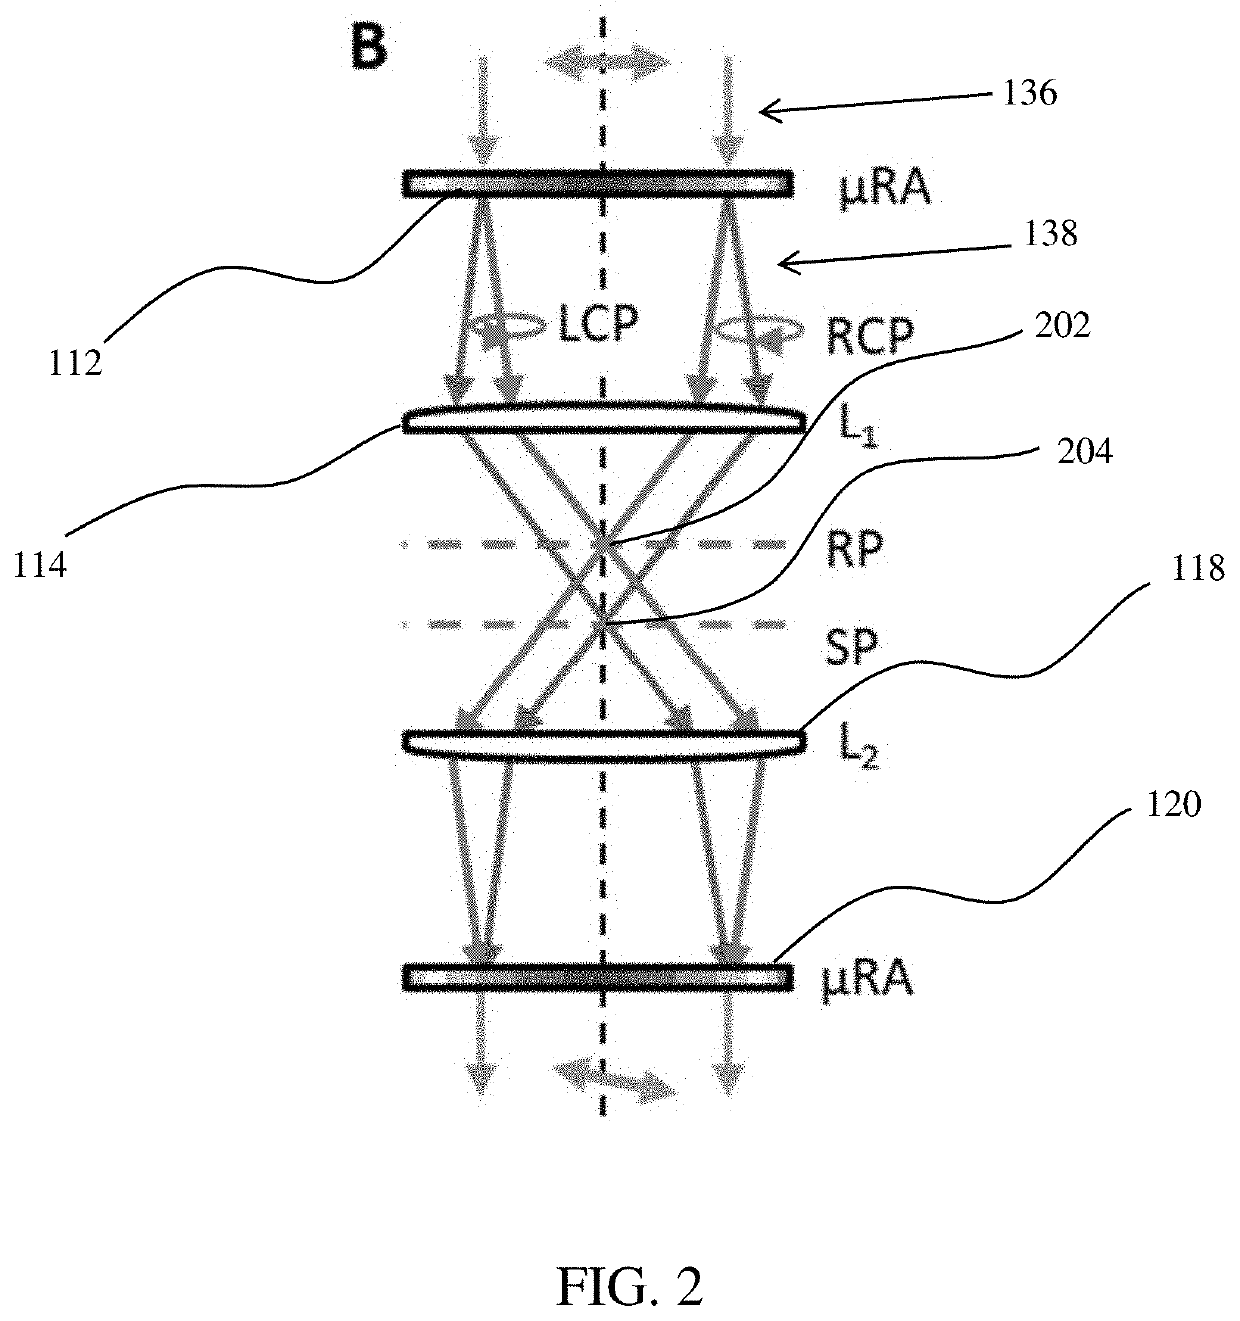 Axially-Offset Differential Interference Contrast Correlation Spectroscopy